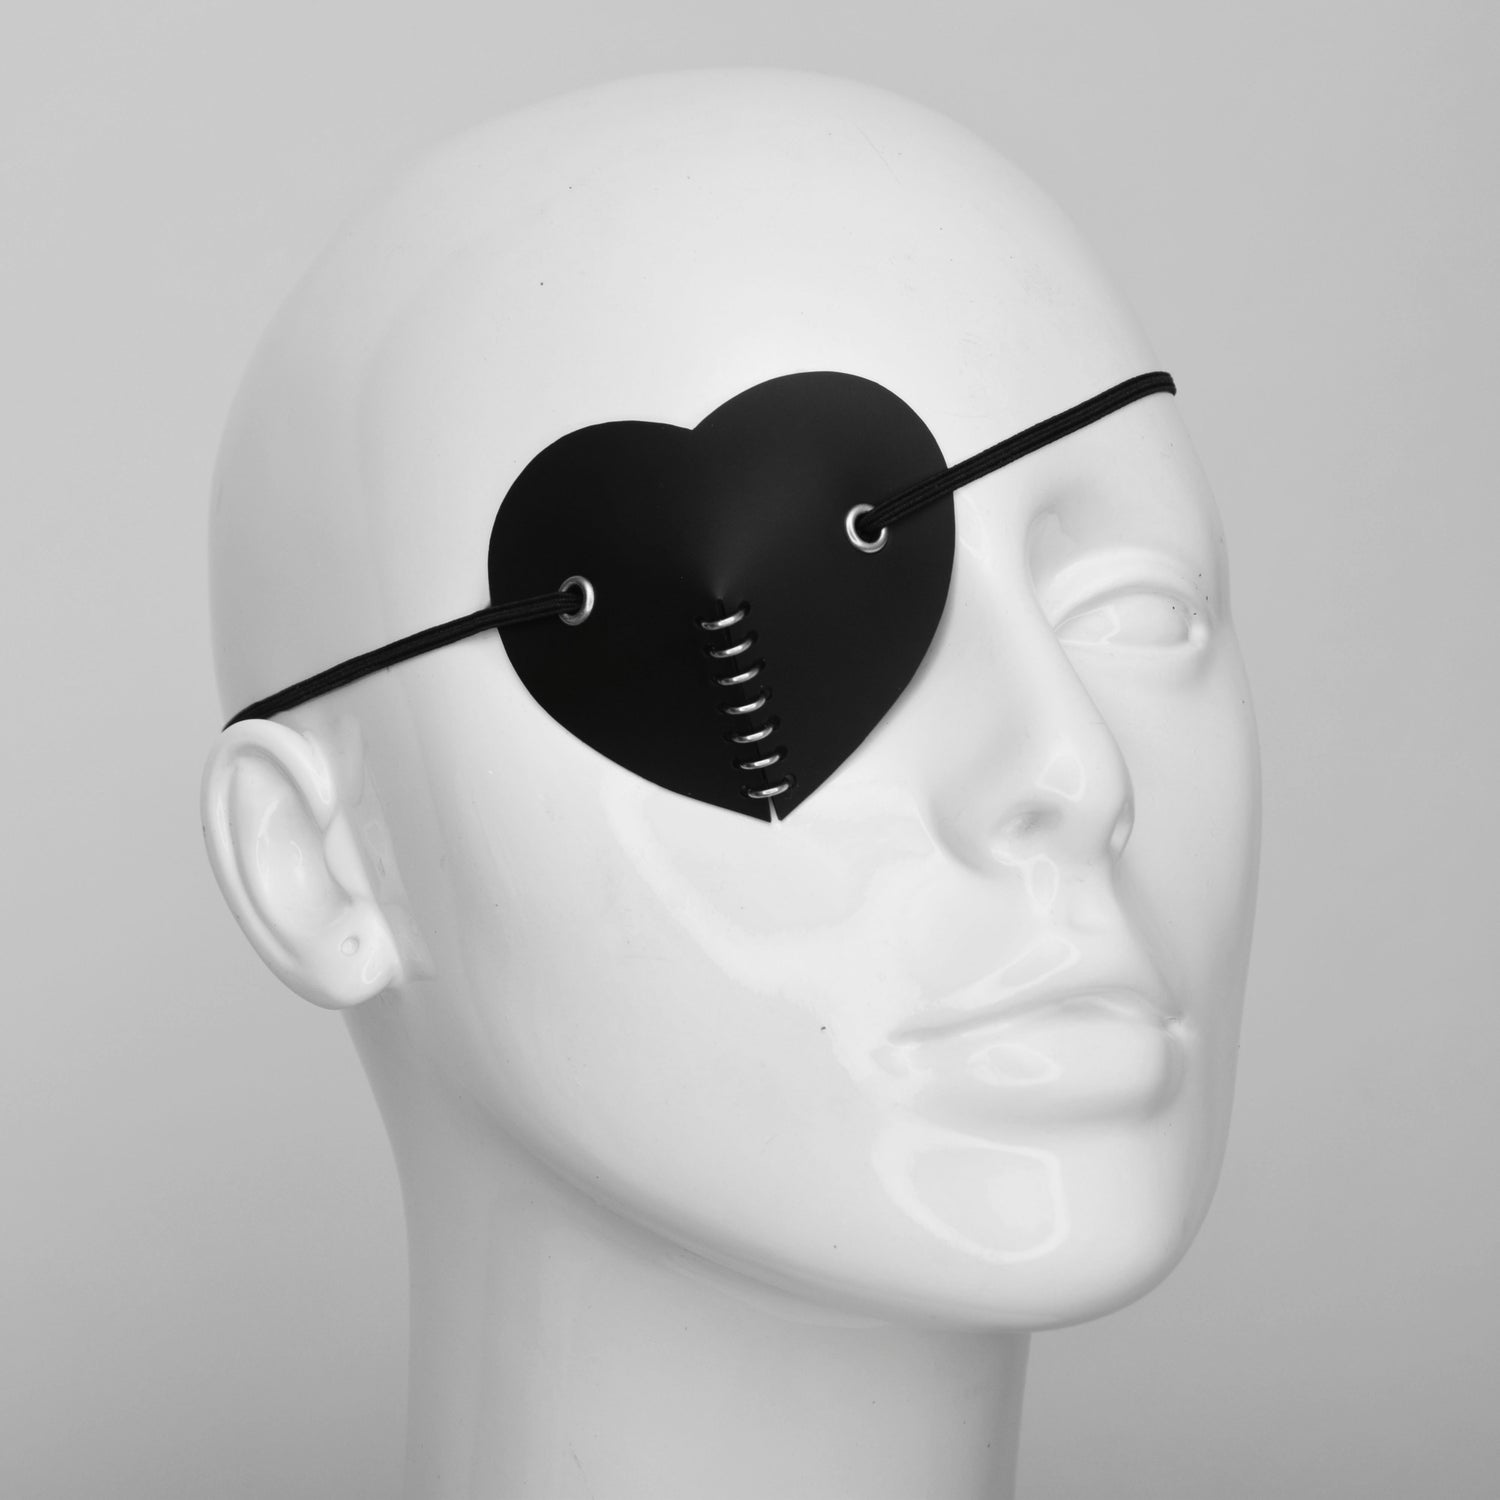 Eye Patches